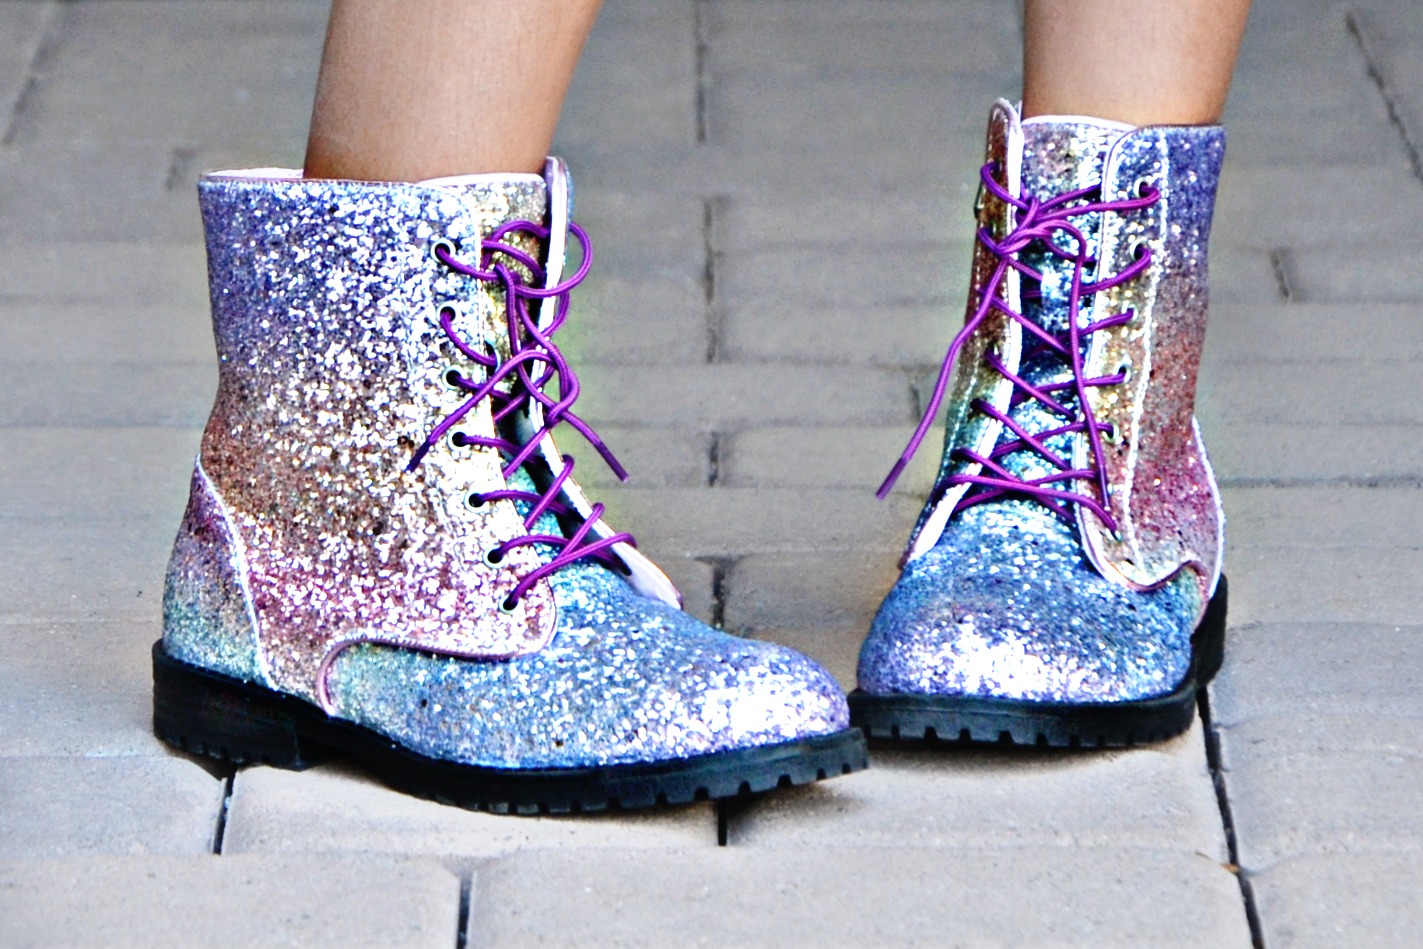 Sam Edelman POLLY Sophia CHUNKY combat boots are fun and sparkly!